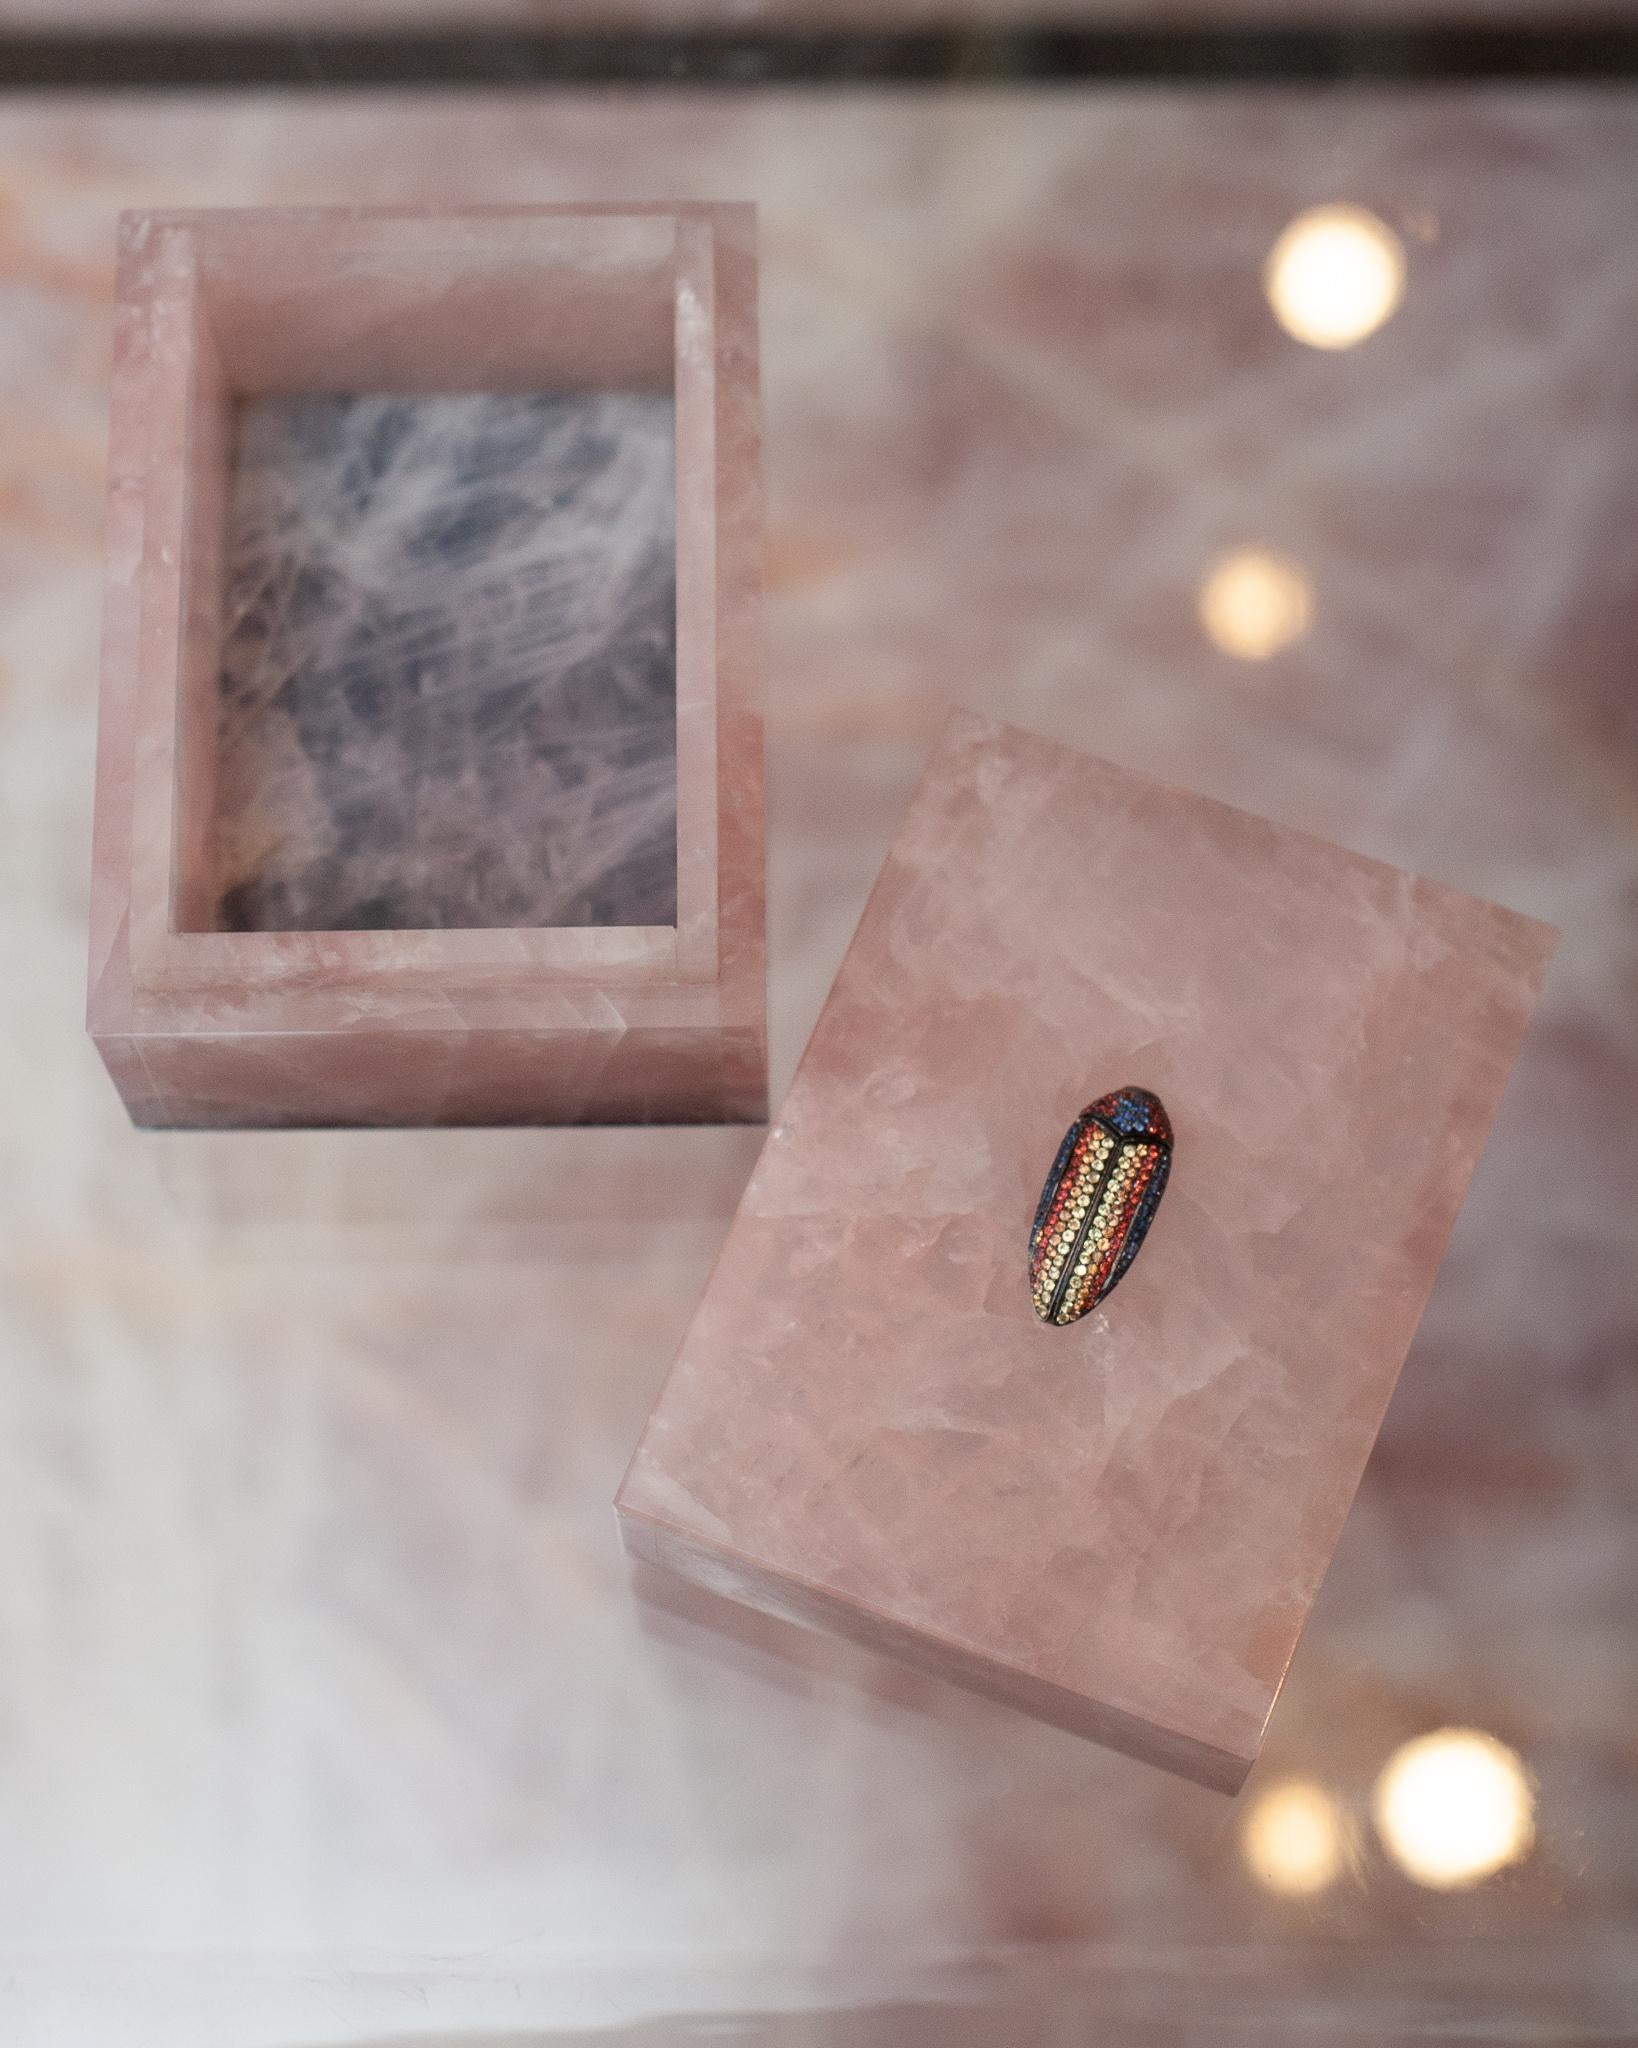 A true piece of jewellery for the home, this handmade pink rose quartz box is finished with a precision fit lid and base, featuring a natural sapphire pavé insect set into black rhodium vermeil. Elegant and opulent, this stunning box is a sparkling